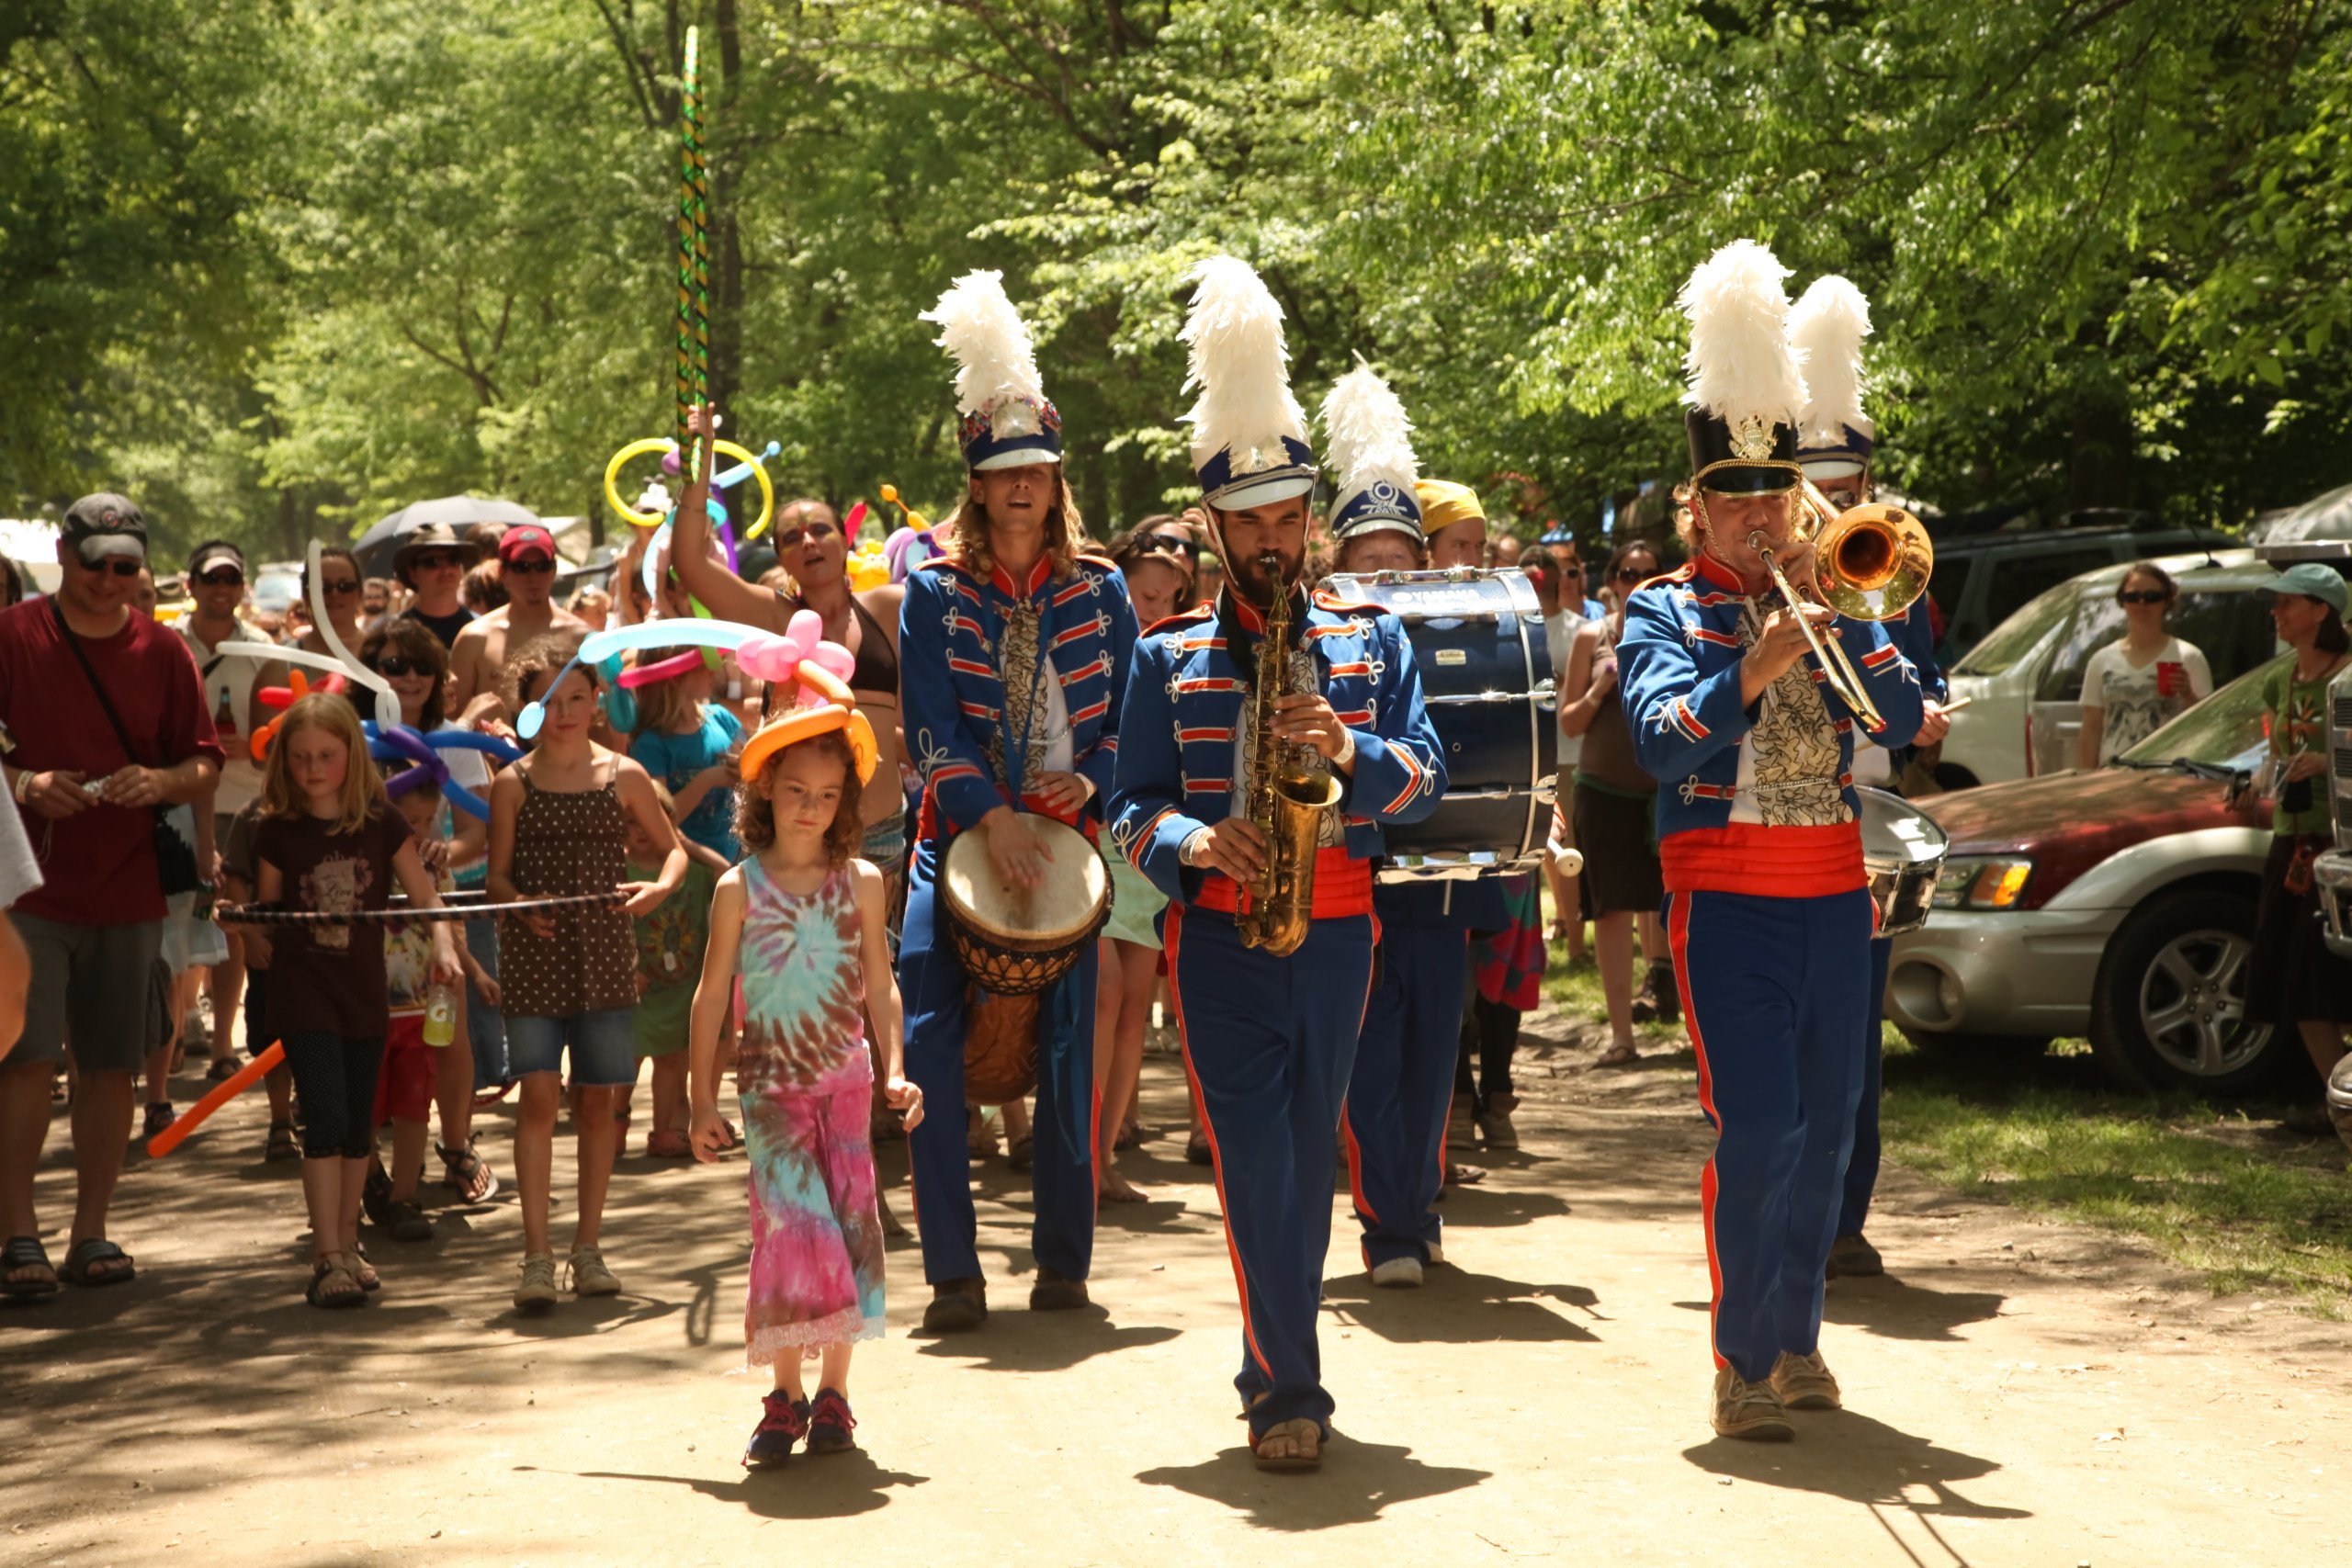 Celebrate the 24th Annual French Broad River Festival